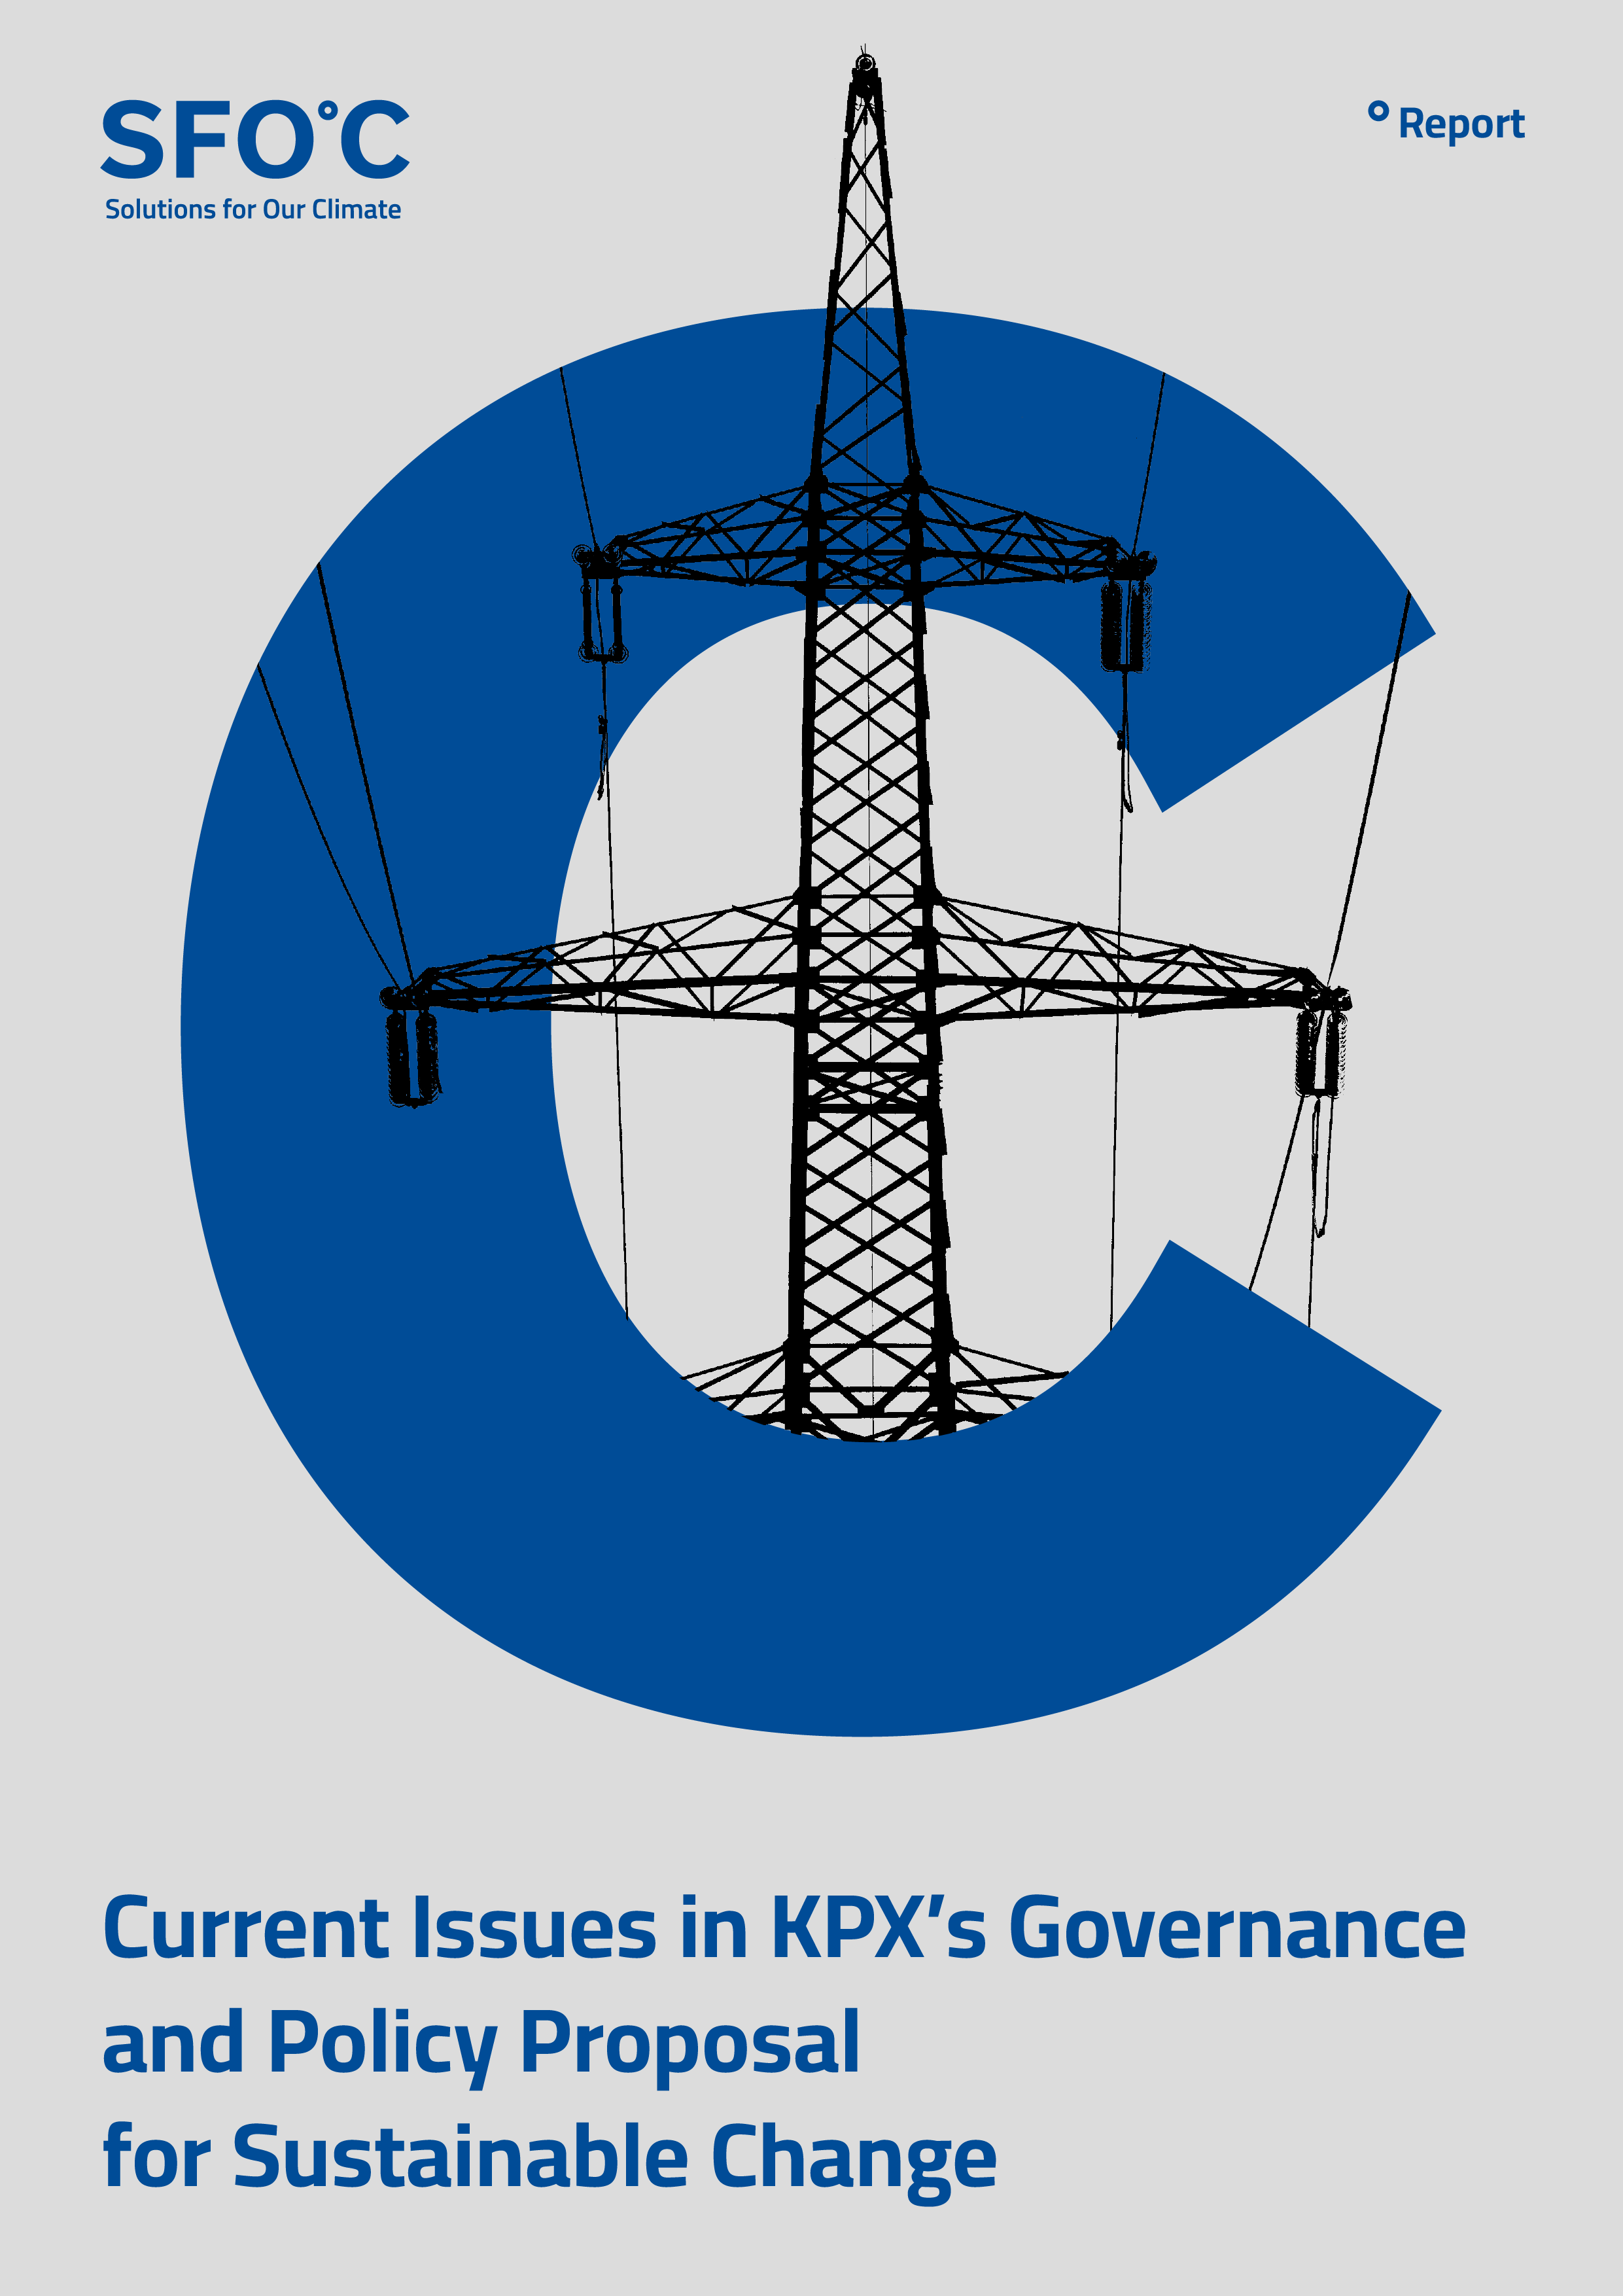 Current Issues in KPX’s Governance and Policy Proposal for Sustainable Change